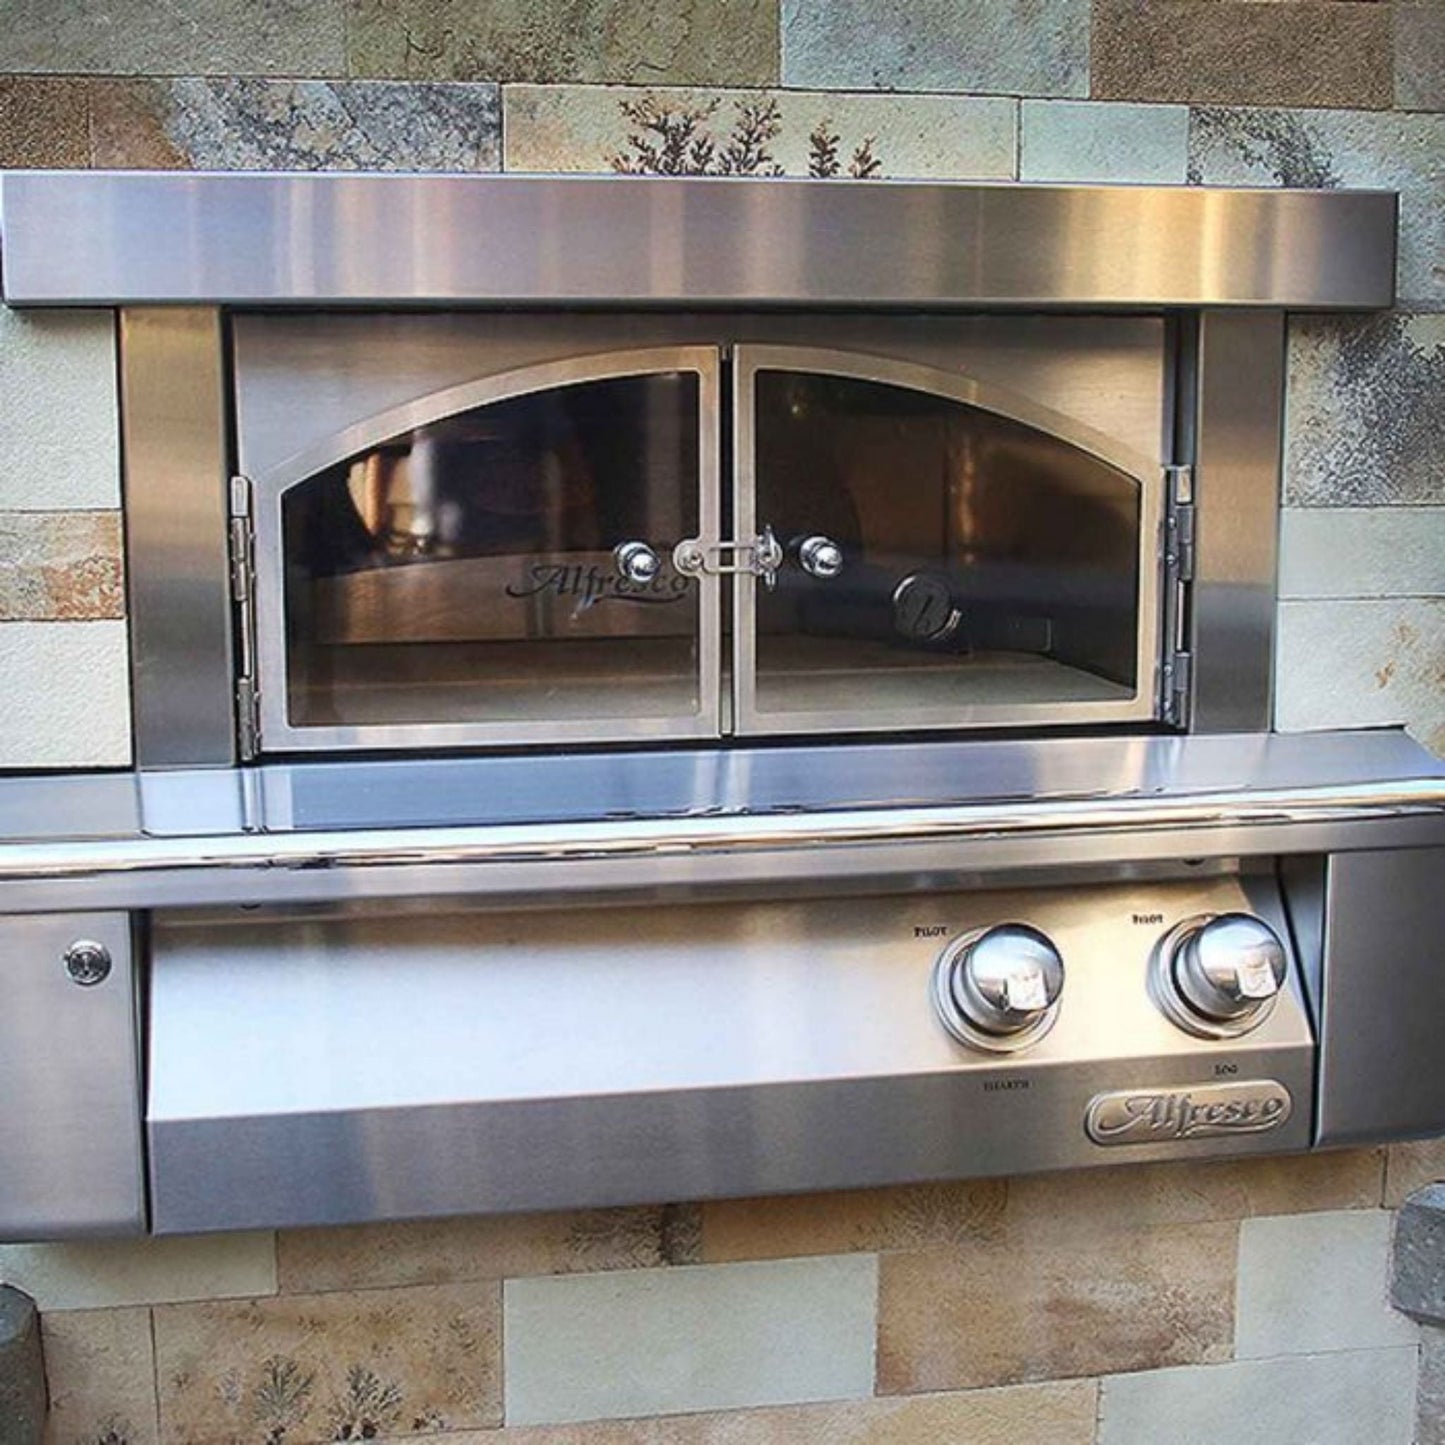 Alfresco 30" Stainless Steel Natural Gas Pizza Oven for Built-in Installations